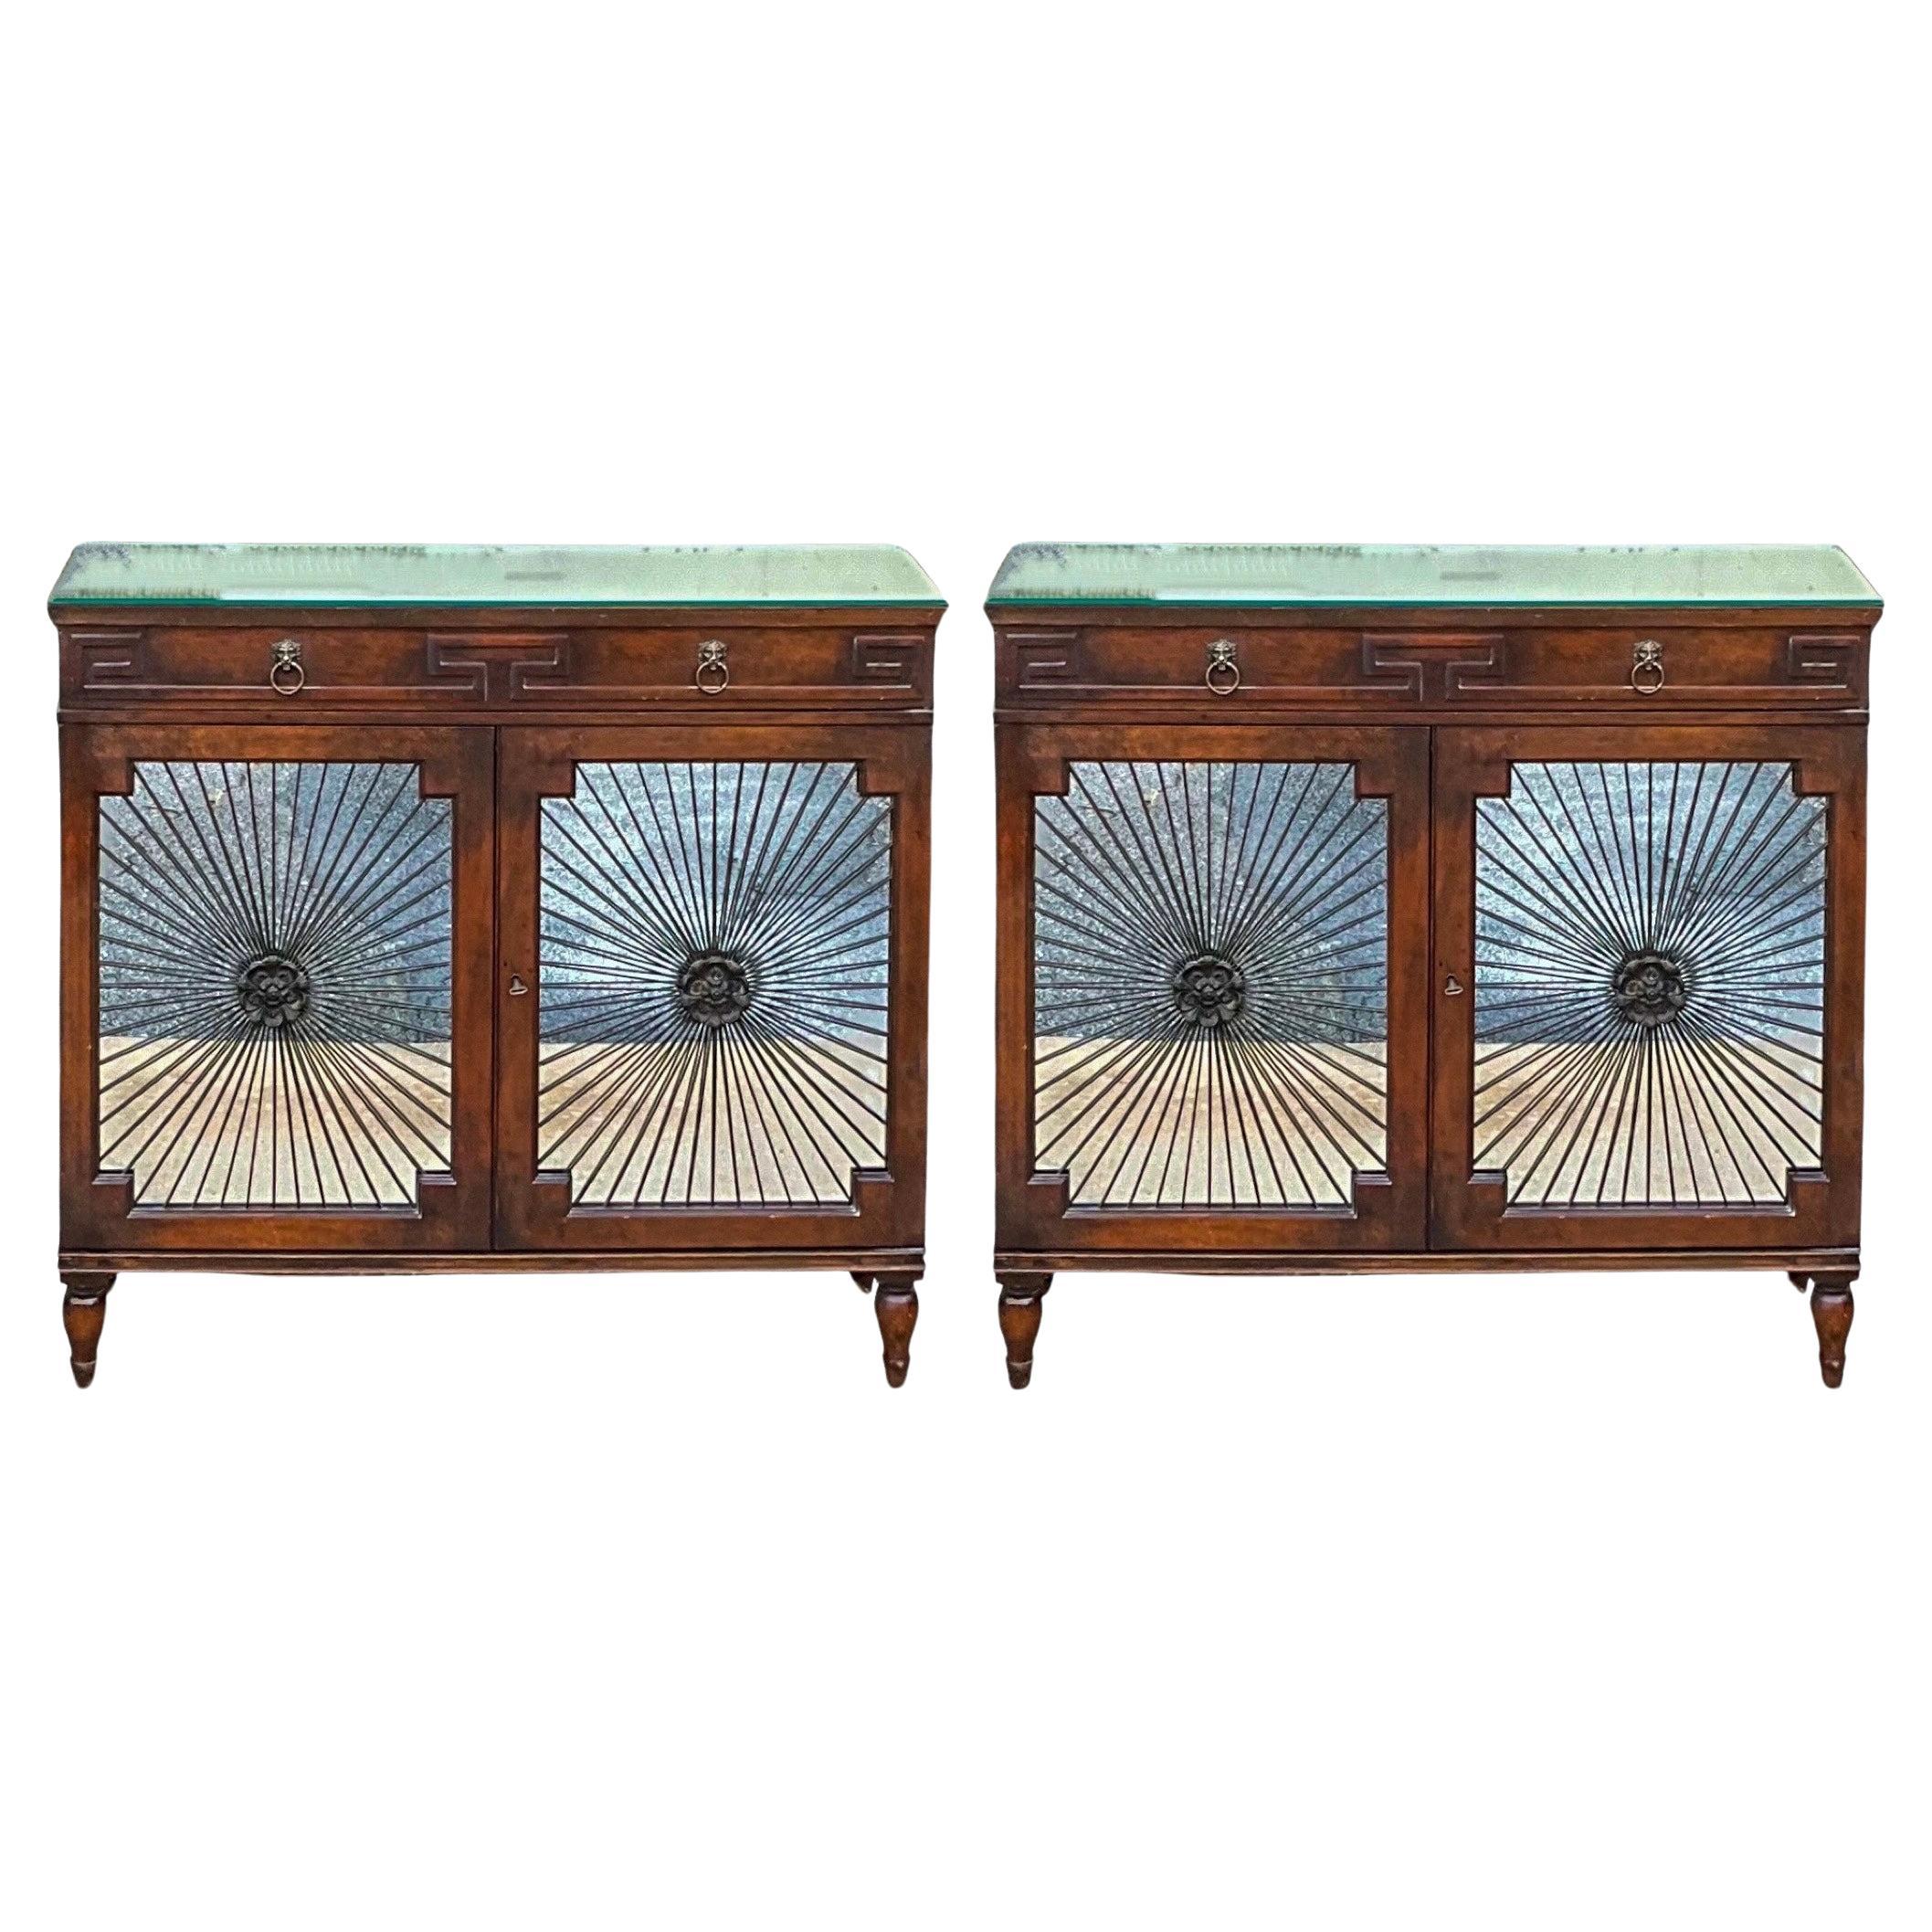 This is a pair of 1950s regency style mahogany cabinets with mirrored starburst fronts and mirrored tops. The cabinet opens to a single shelf. There is a key. They are unmarked and in very good condition.

My shipping is for the Continental US only,